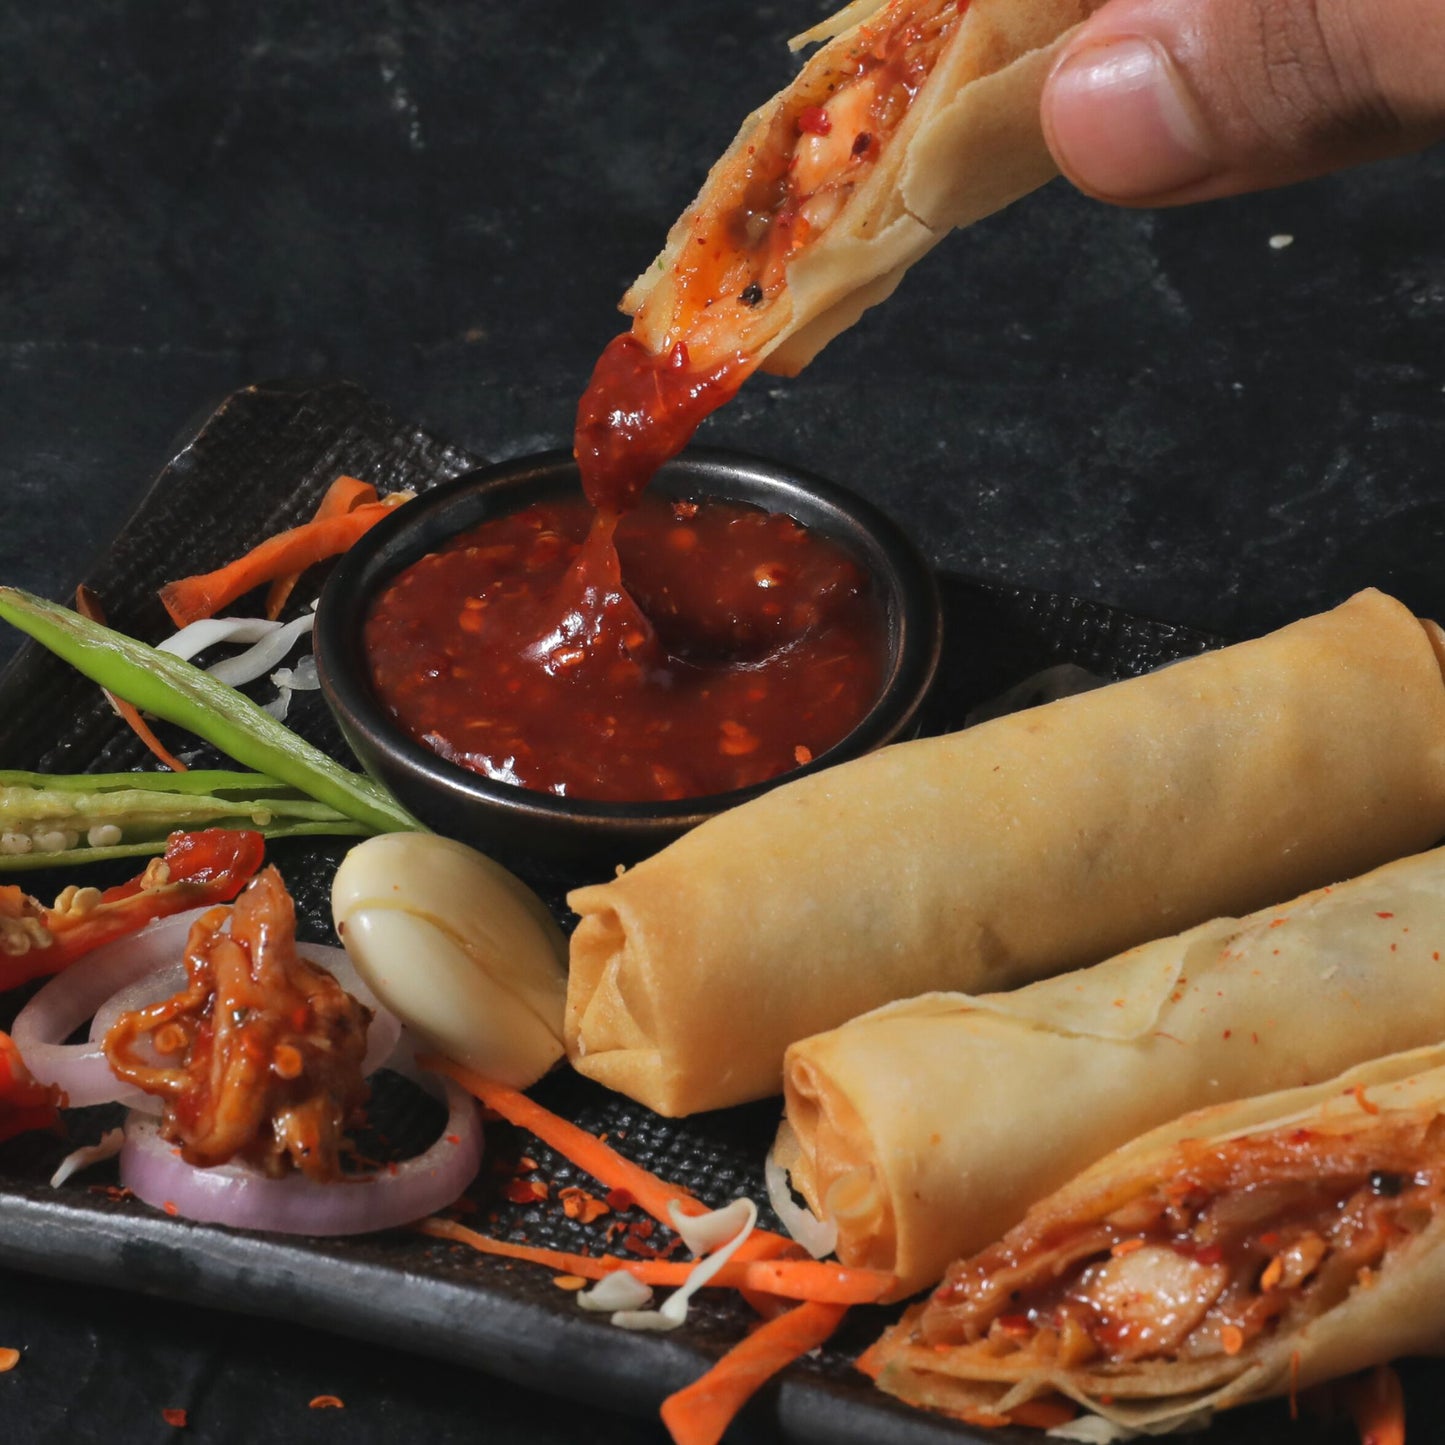 6 springs rolls with dippings + 2 noodles + 2 Mojitos of your choice for 2 people at Spring Rolls, One Galle face